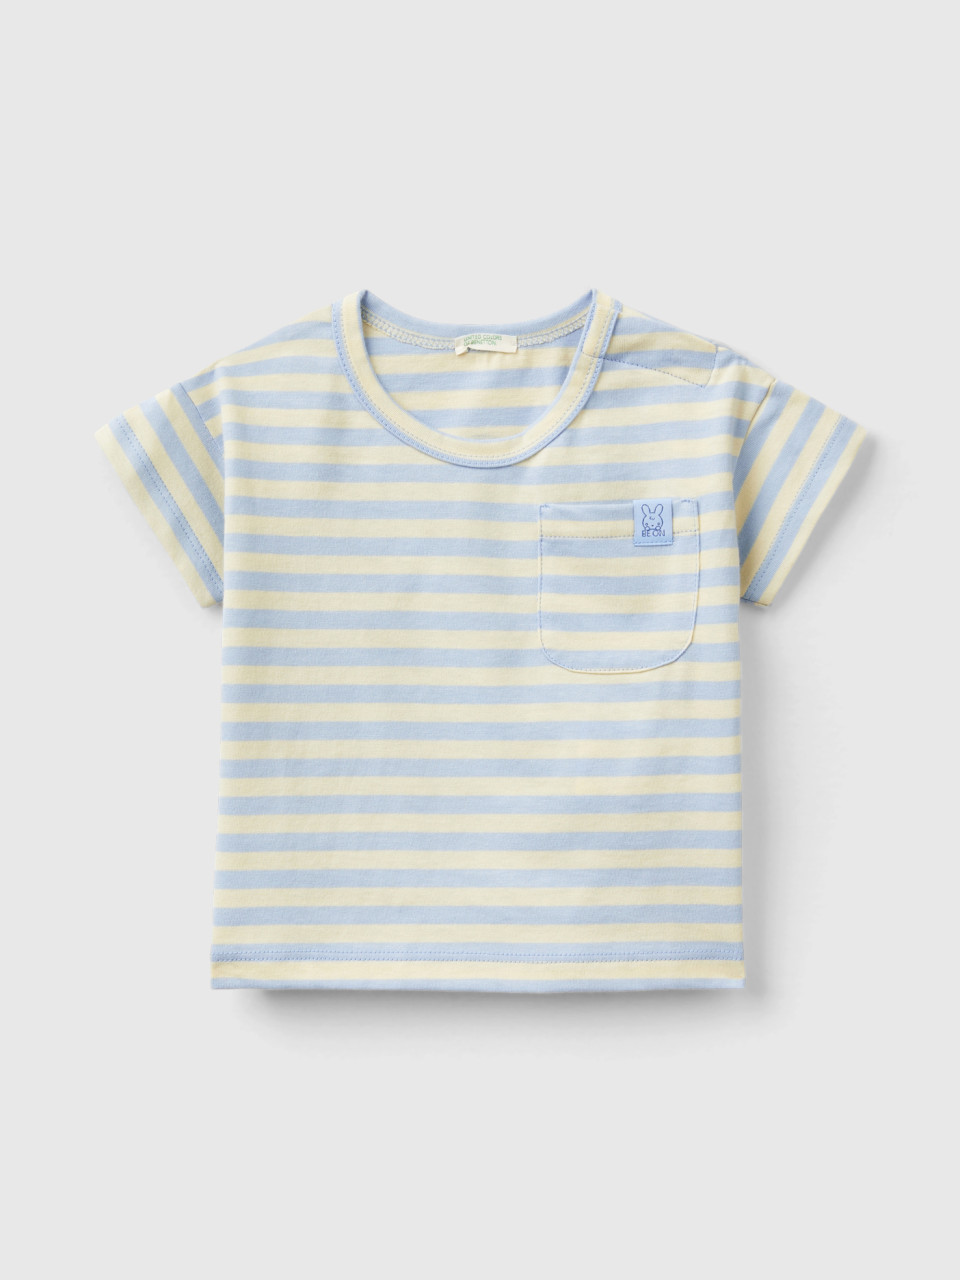 Benetton, Striped T-shirt With Ice-cream Print, Multi-color, Kids